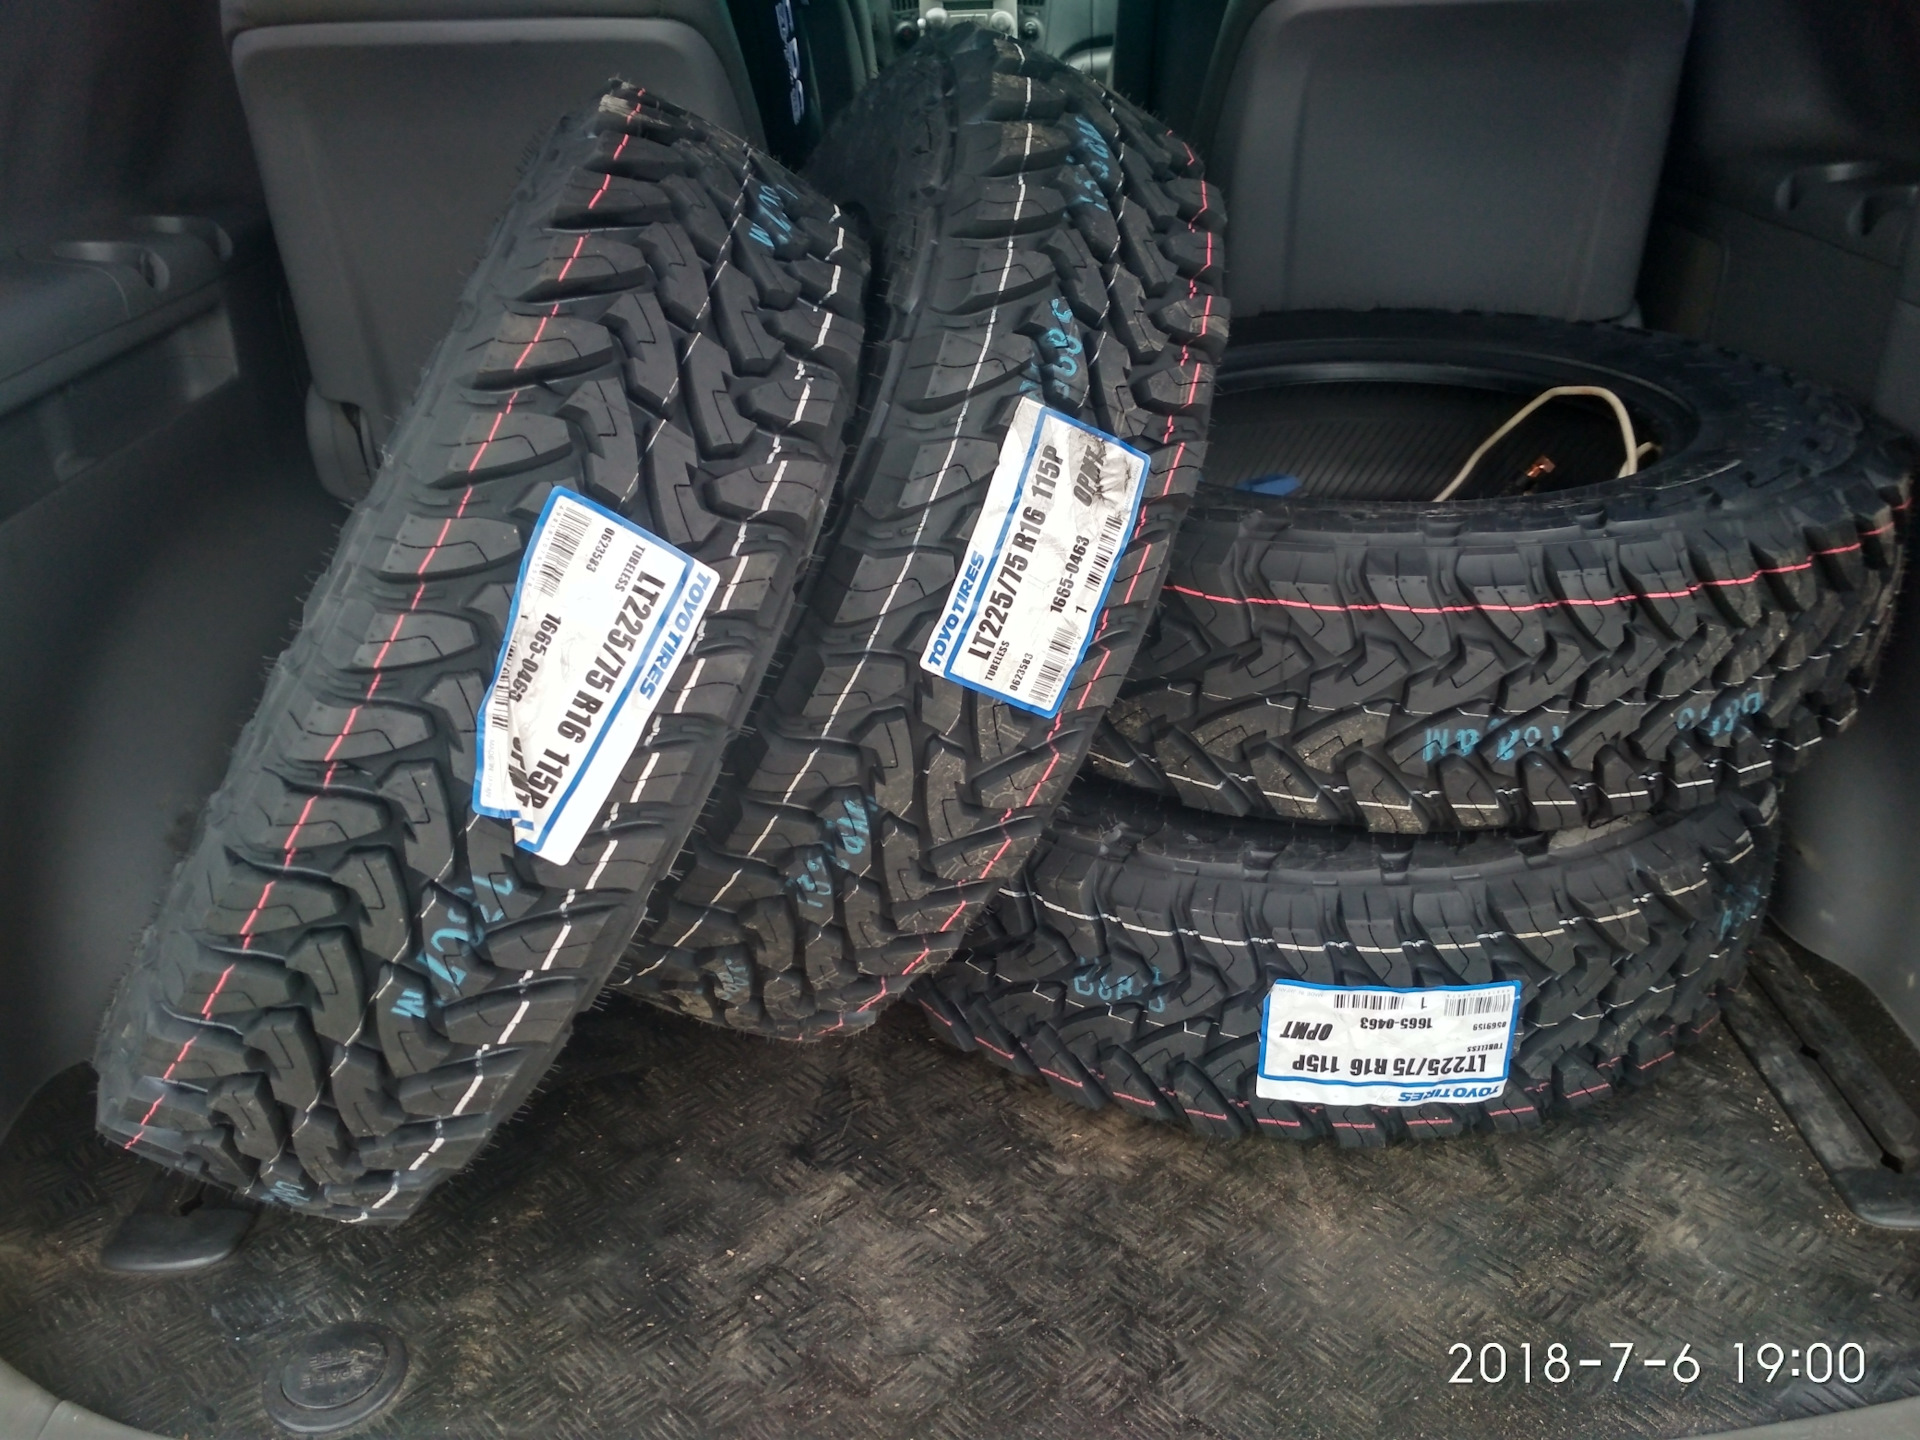 Toyo open country m. Тойо опен Кантри МТ 225/75 r16. Toyo резина 225 75 r16 МТ. Toyo MT 265 75. Toyo MT 245/75 r16.